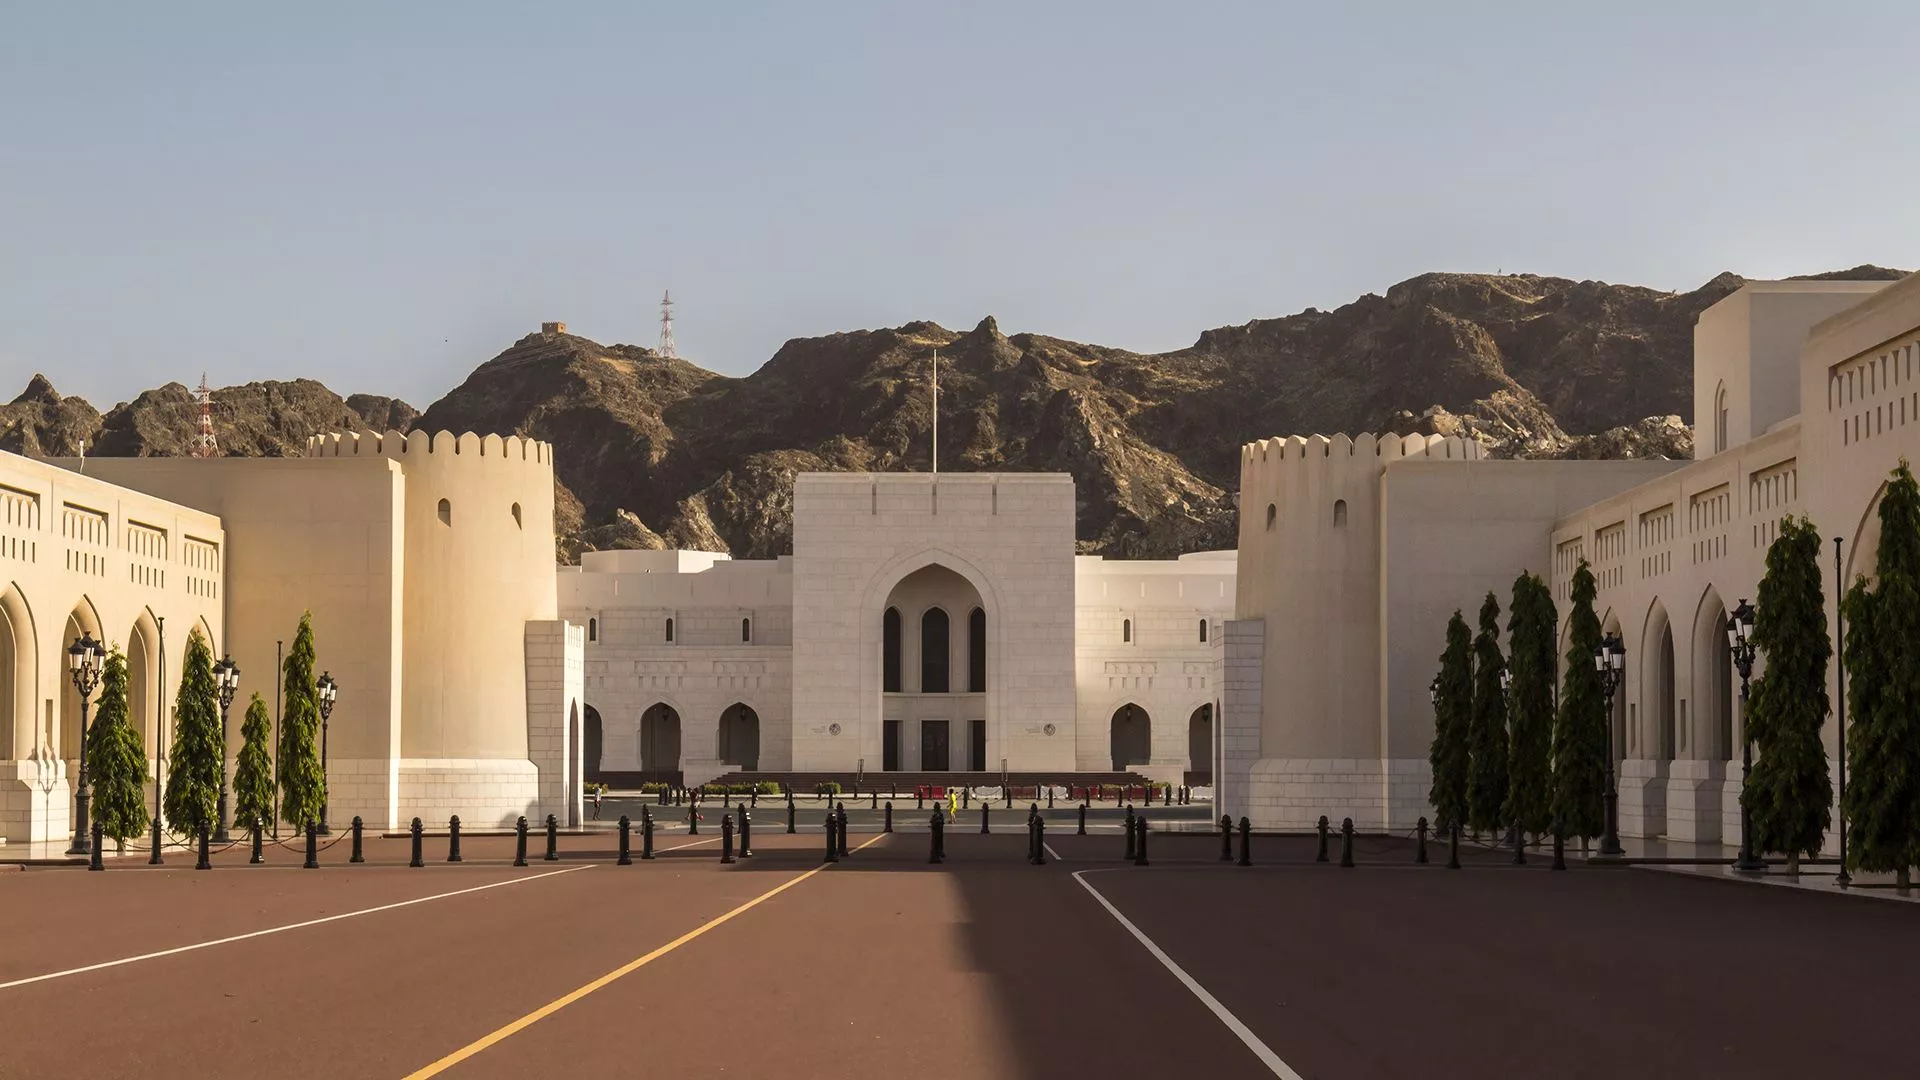 National Museum of Oman in Oman, Middle East | Museums - Rated 3.8